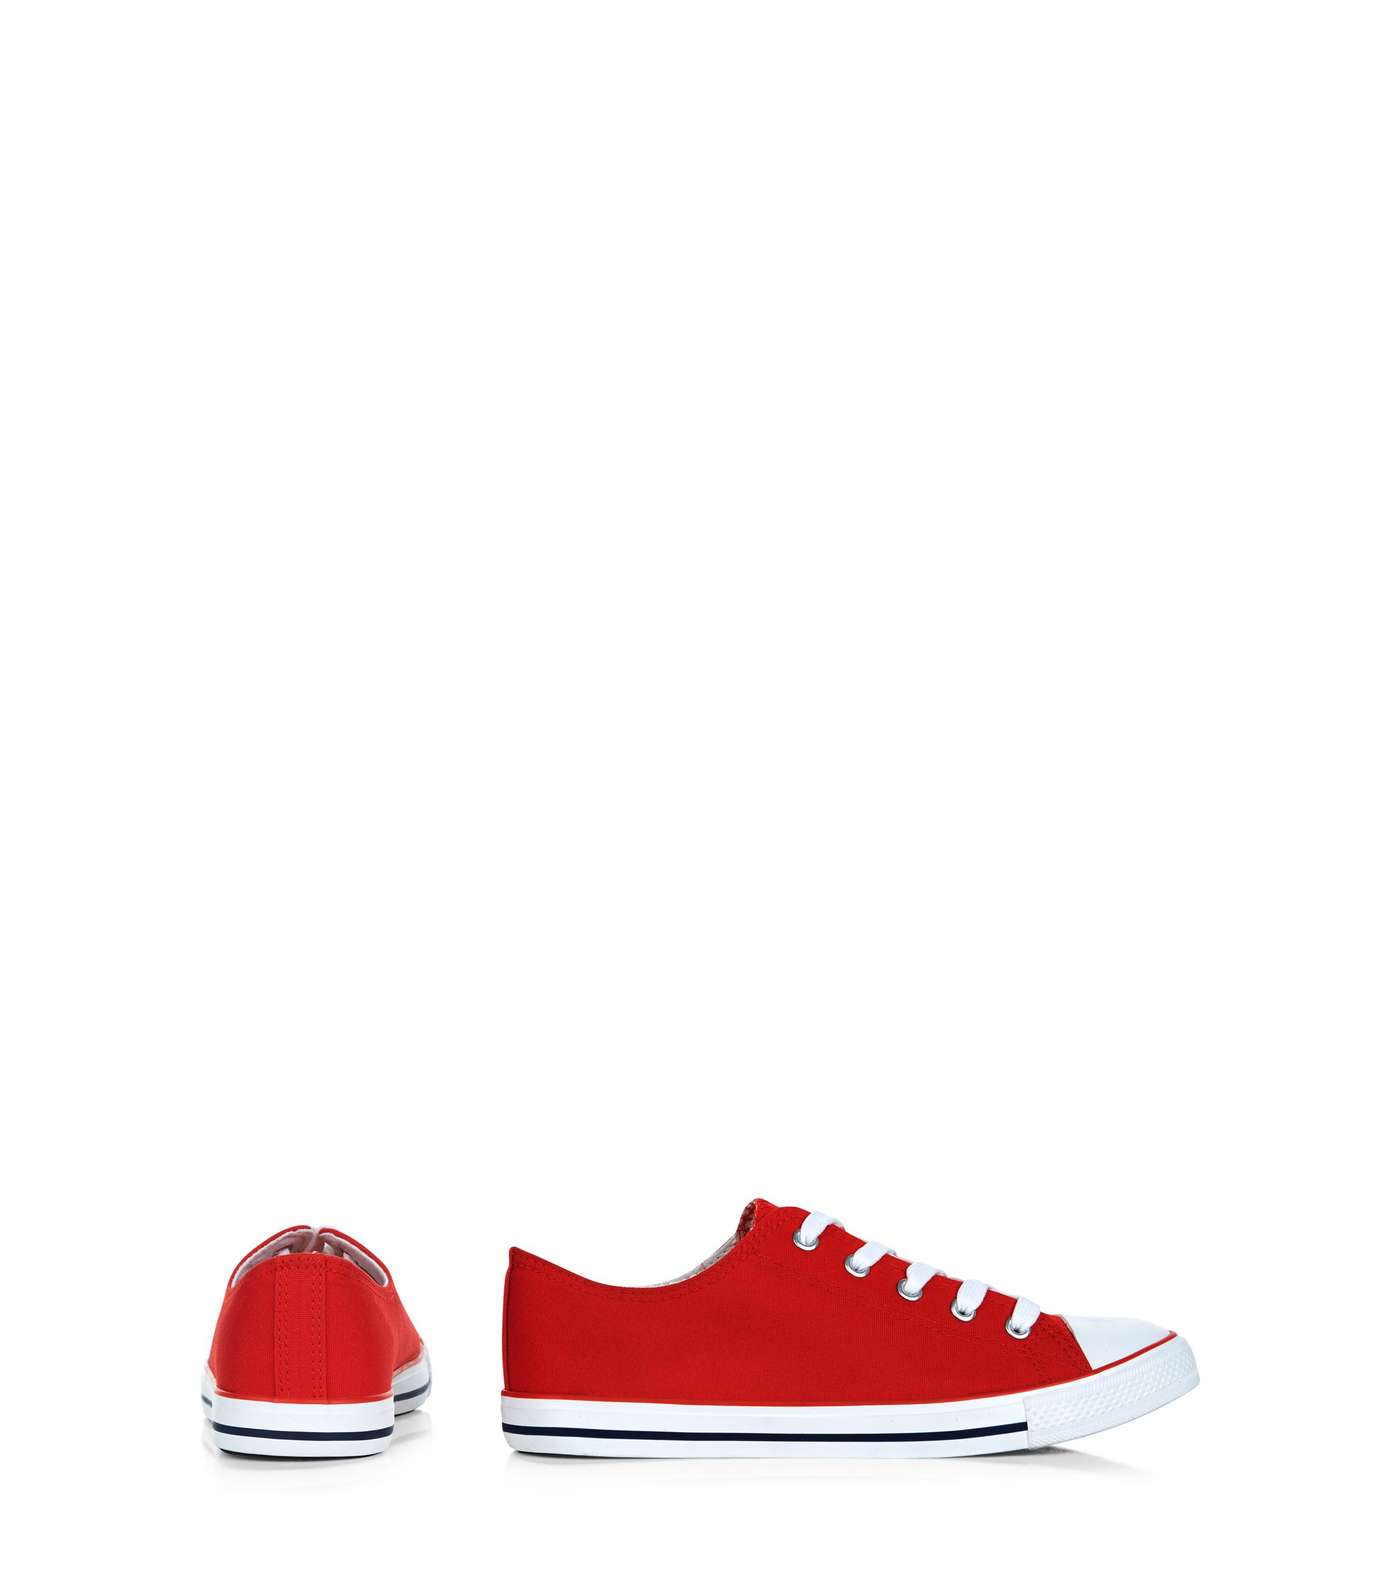 Red Lace Up Striped Sole Plimsolls  Image 4